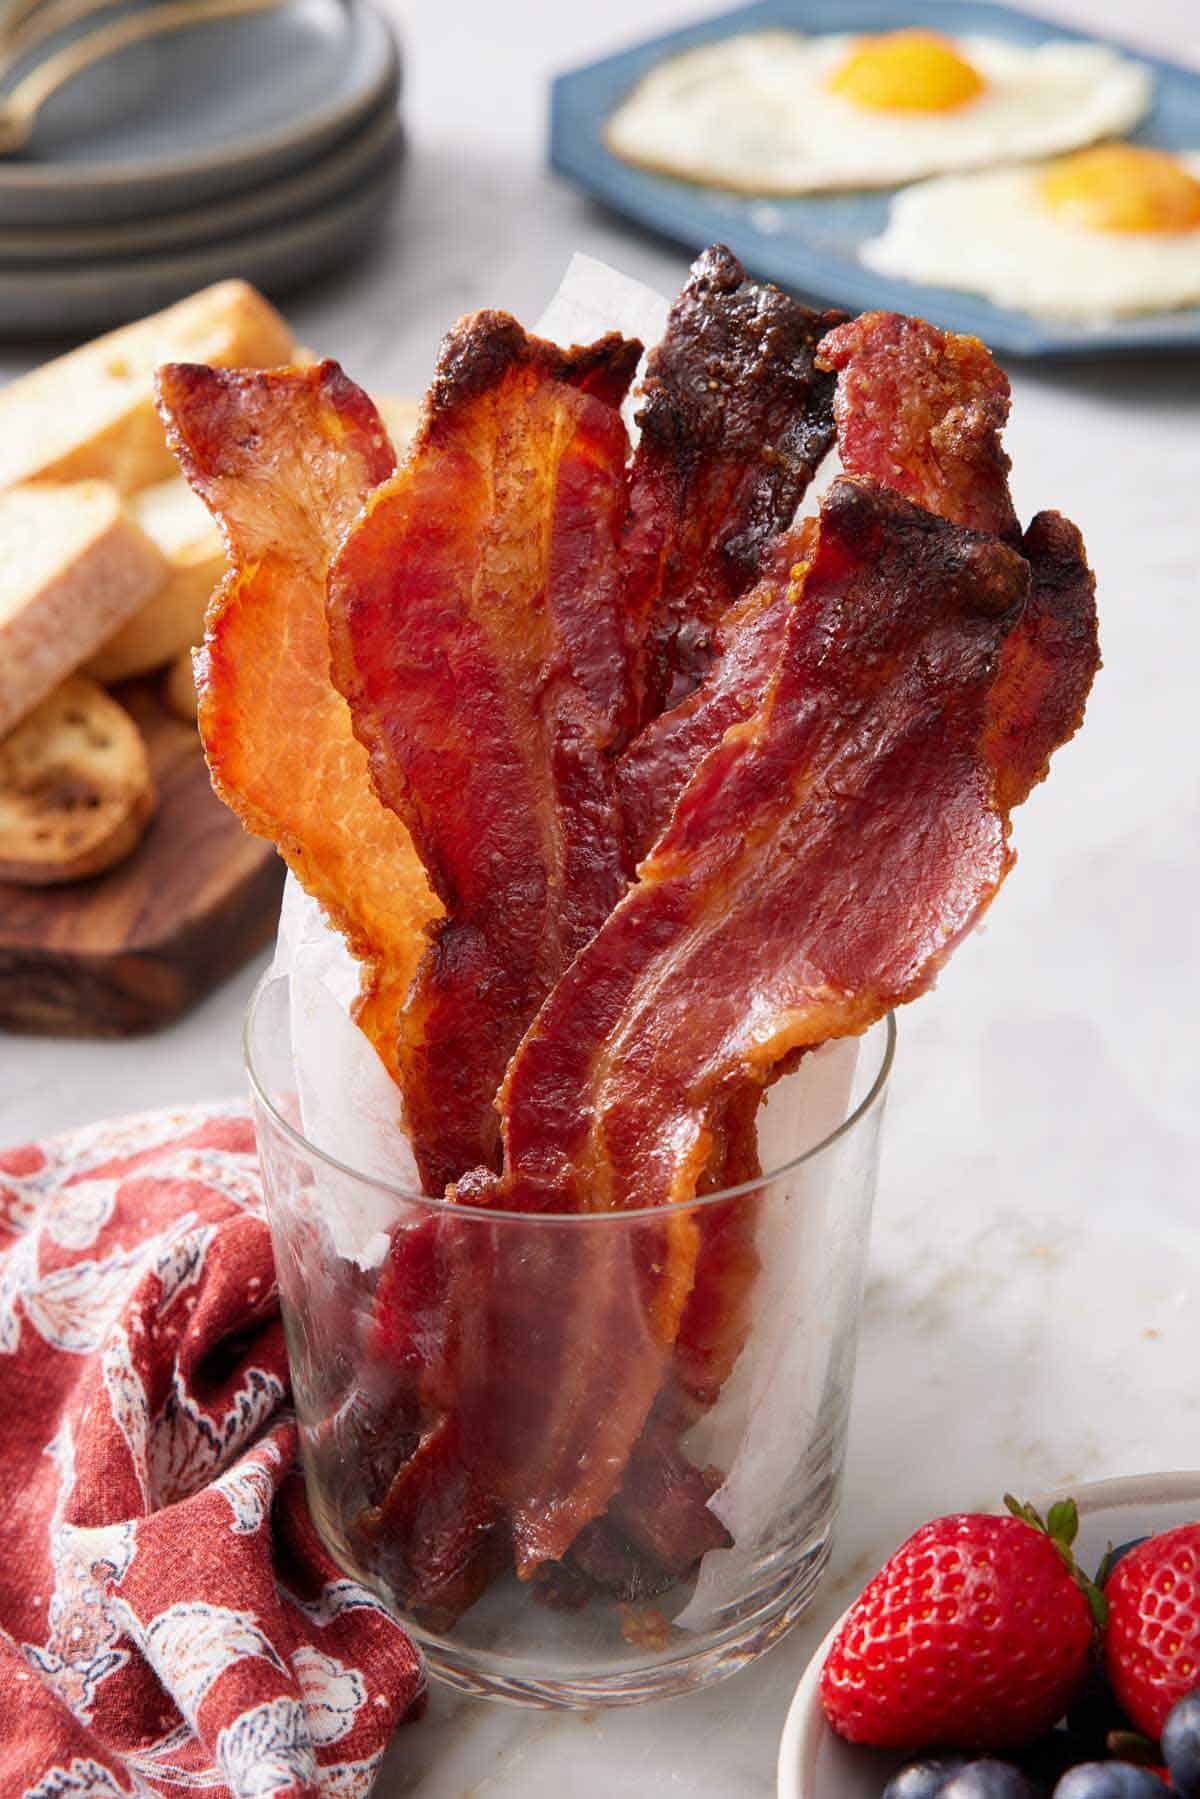 A glass cup of candied bacon. A platter in the background with fried eggs, sliced bread, and a stack of plates.